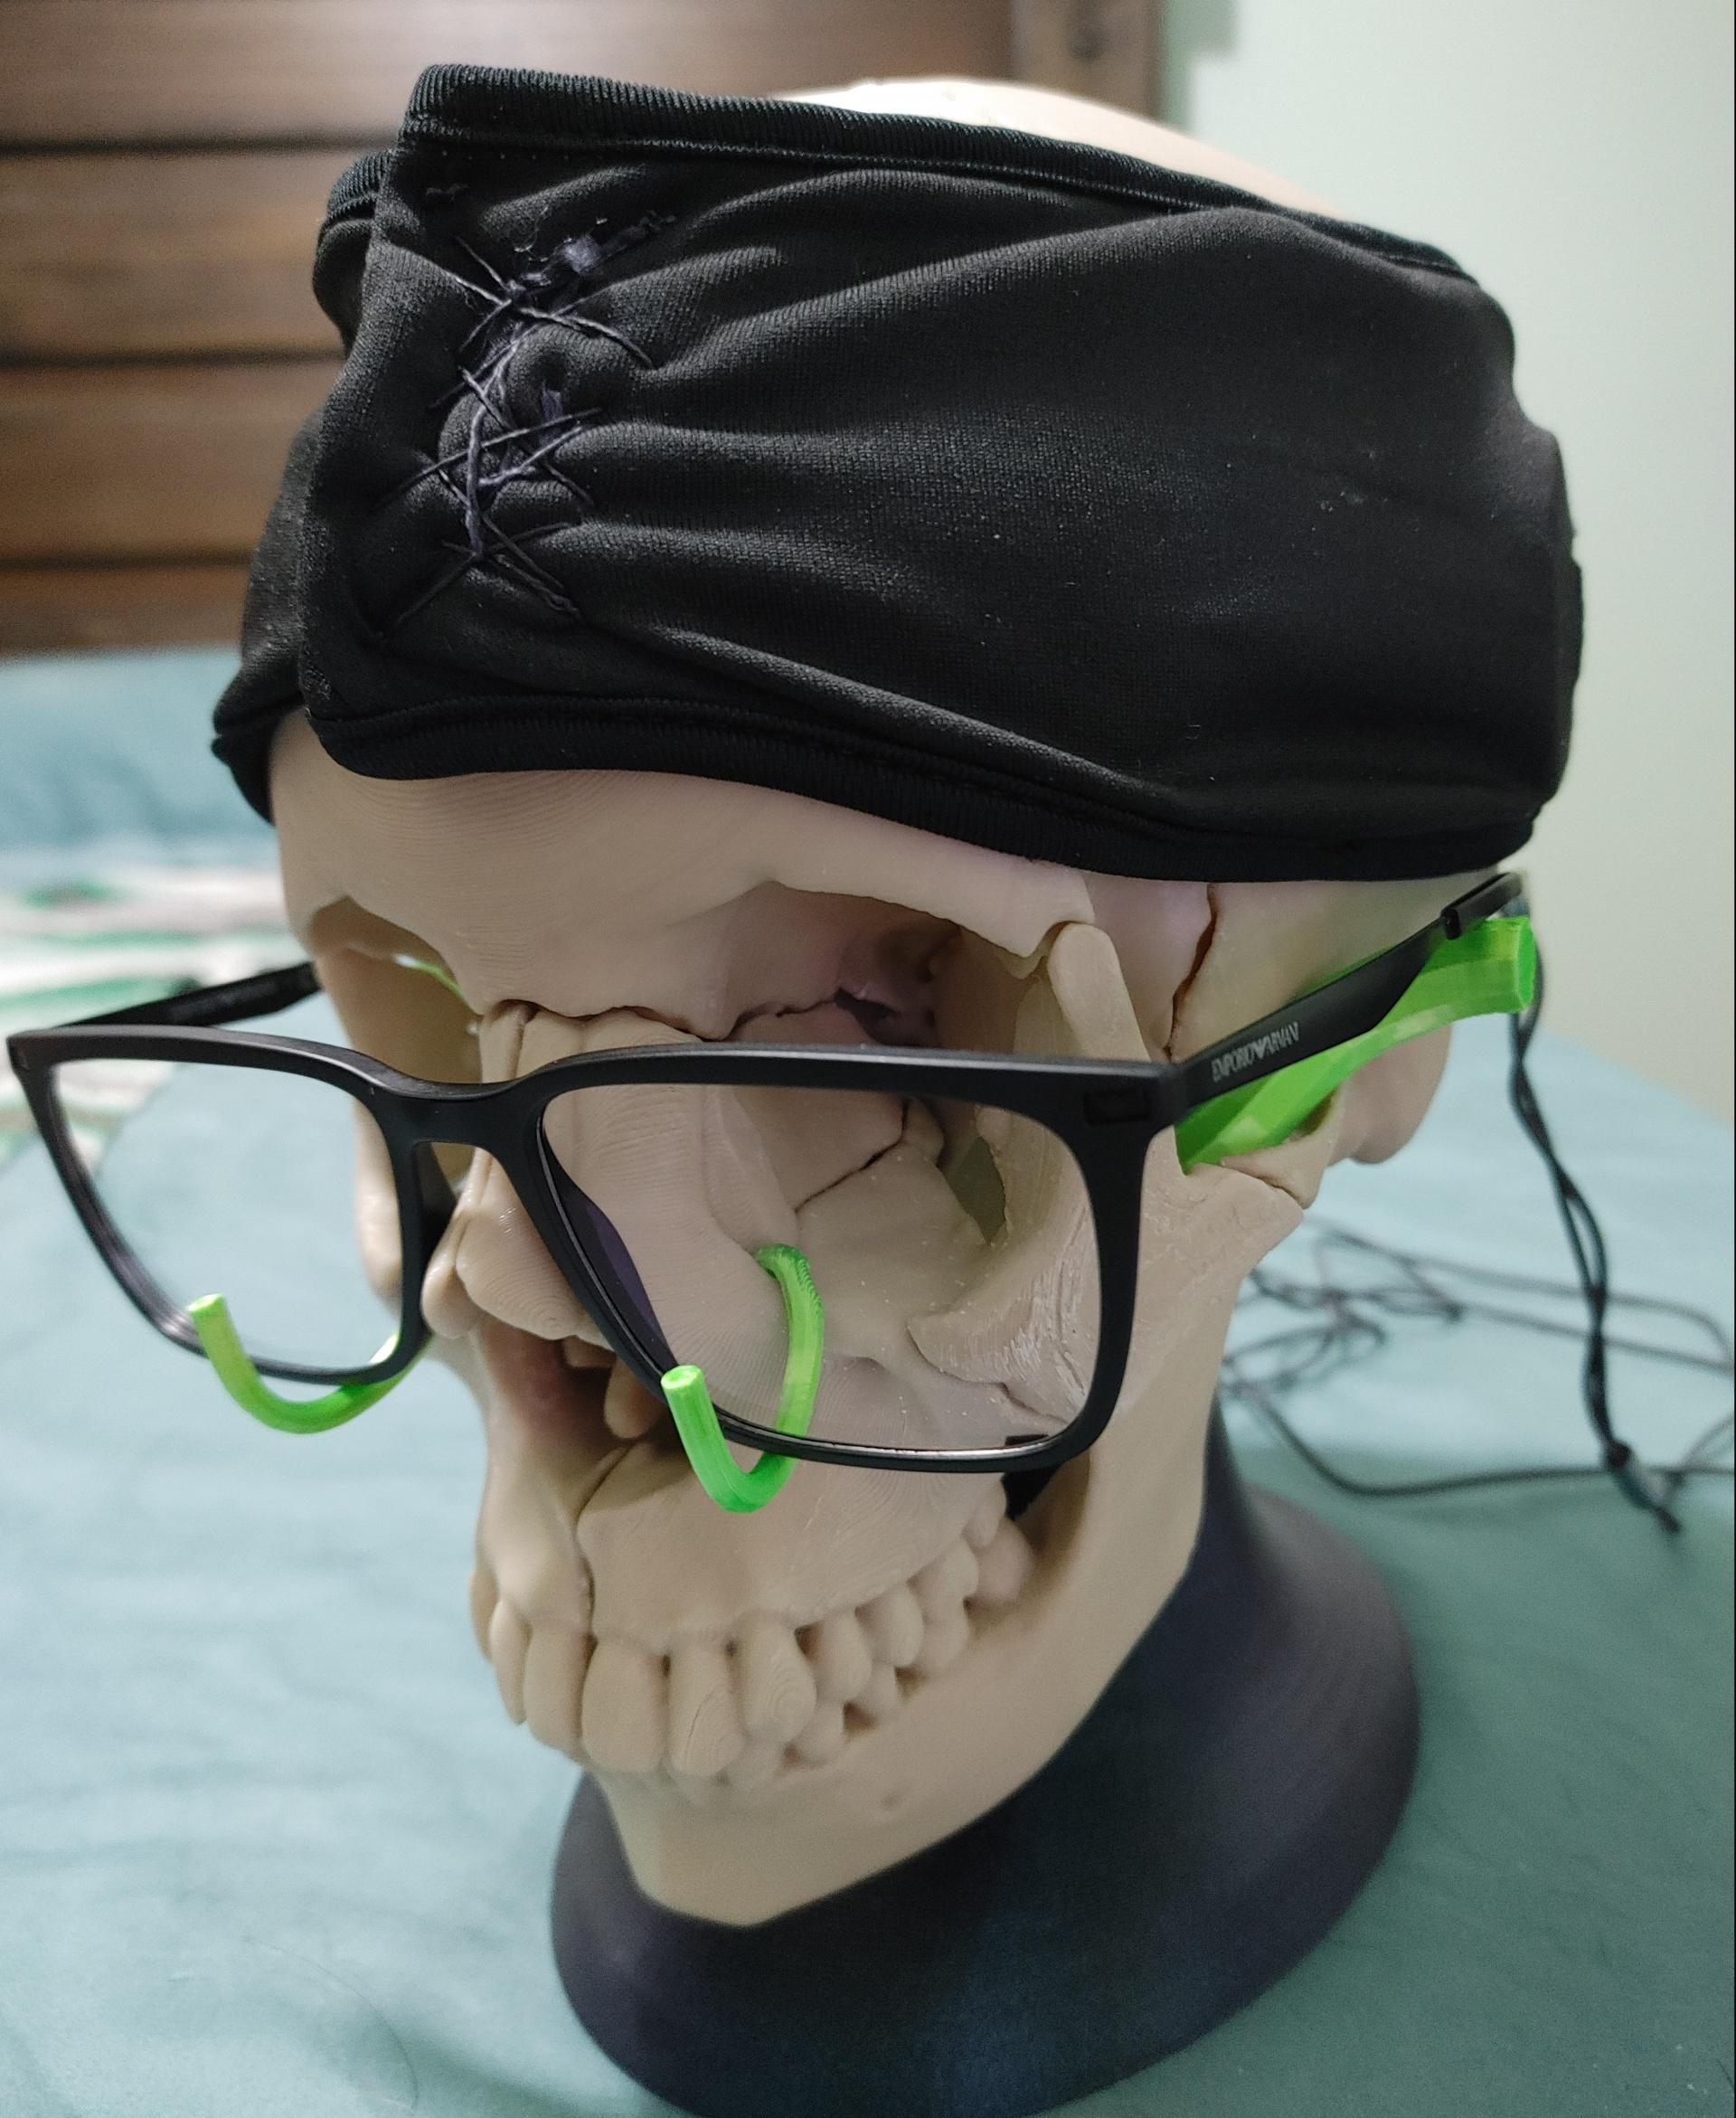 Full Size Anatomically - Skull was made in eSUN PLA+ Bone White at 0.2mm layer height and 15% infill. I added my own glasses holders in the lime green.

To answers the questions in my other comment:
1. YES. The magnets feel plenty strong for the headband and even for shaking the skull somewhat hard. I didn't print this solid, so it's still pretty light weight, but heavier prints would likely still hold as the recommended magnets at N52 are really strong.

2. Clearly yes as you can see in the image. The gap between the pterygoid plate and foramen magnum the stand goes through is plenty big. - 3d model